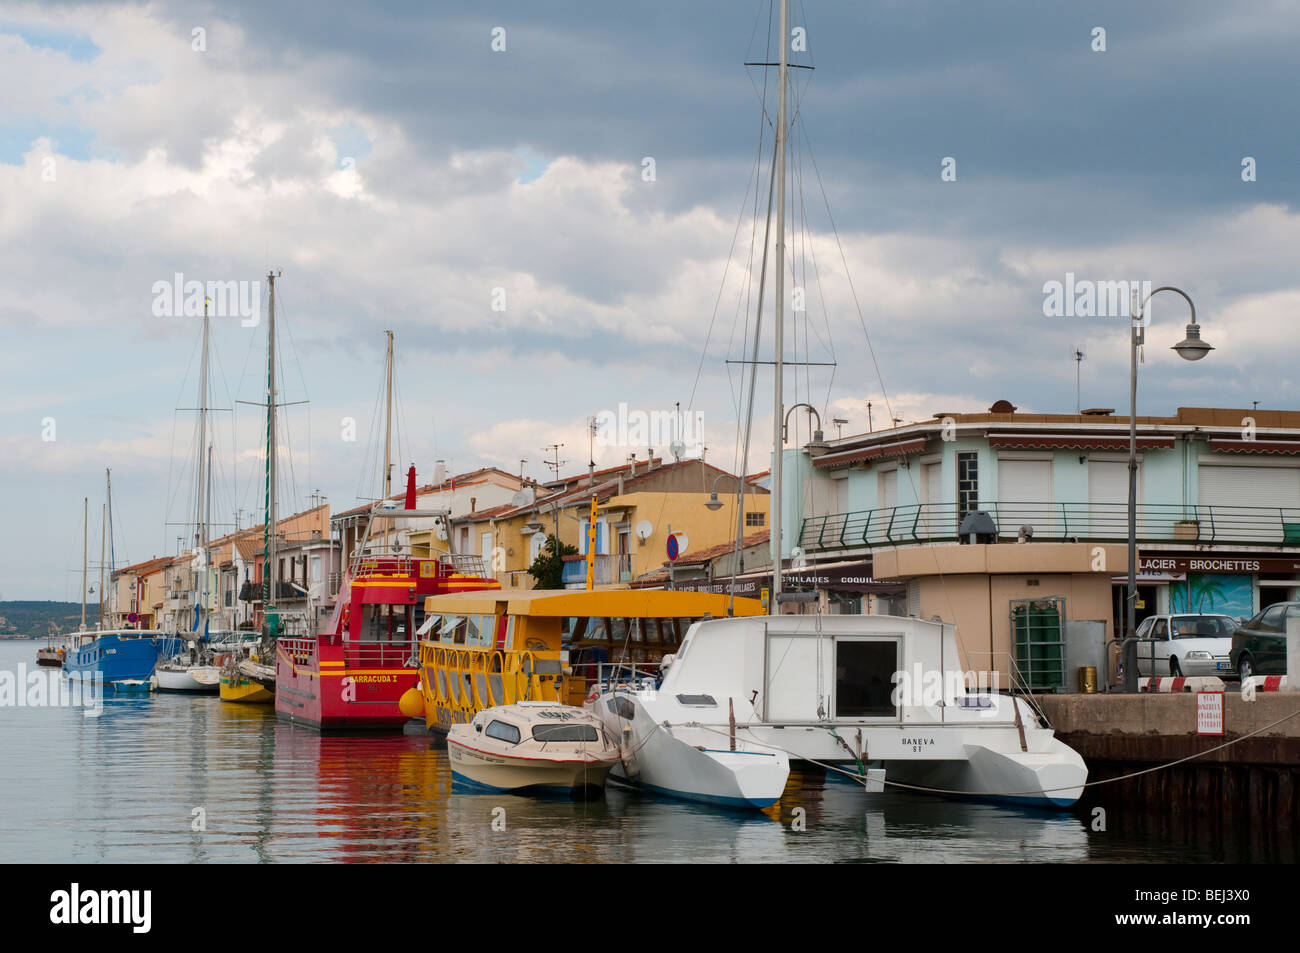 The Pointe Courte, 'village within a town', Sete, France Stock Photo